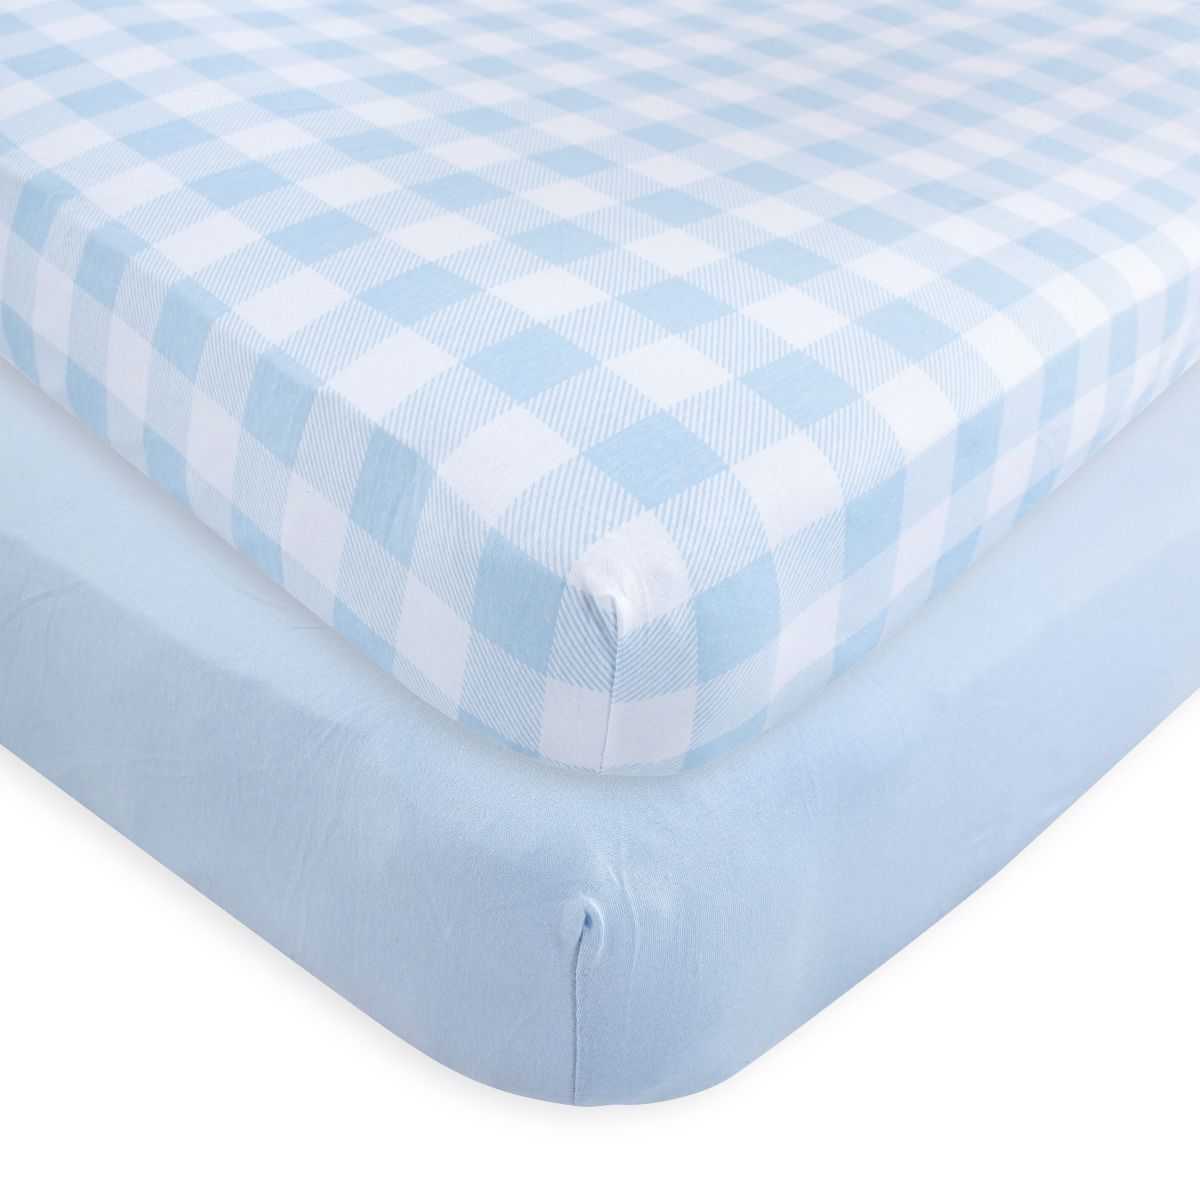 Touched by Nature Baby Boy Organic Cotton Crib Sheet, Plaid Solid Light Blue, One Size | Target